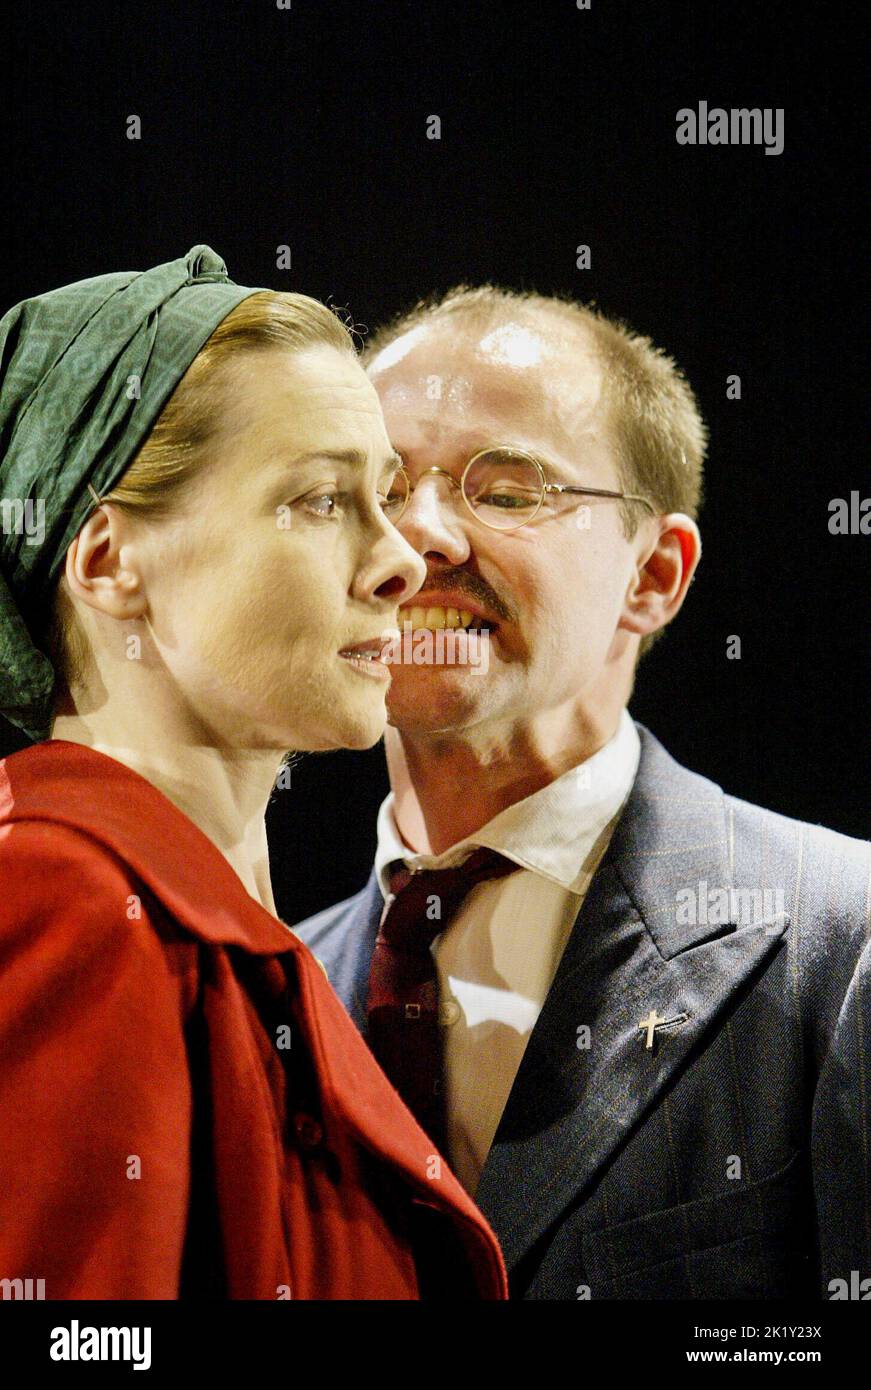 Emma Fielding (Isabella), Daniel Evans (Angelo) in MEASURE FOR MEASURE by Shakespeare at the Royal Shakespeare Company (RSC), Royal Shakespeare Theatre, Stratford-upon-Avon, England  02/05/2003  design: Anthony Lamble  lighting: Tim Mitchell  director: Sean Holmes Stock Photo